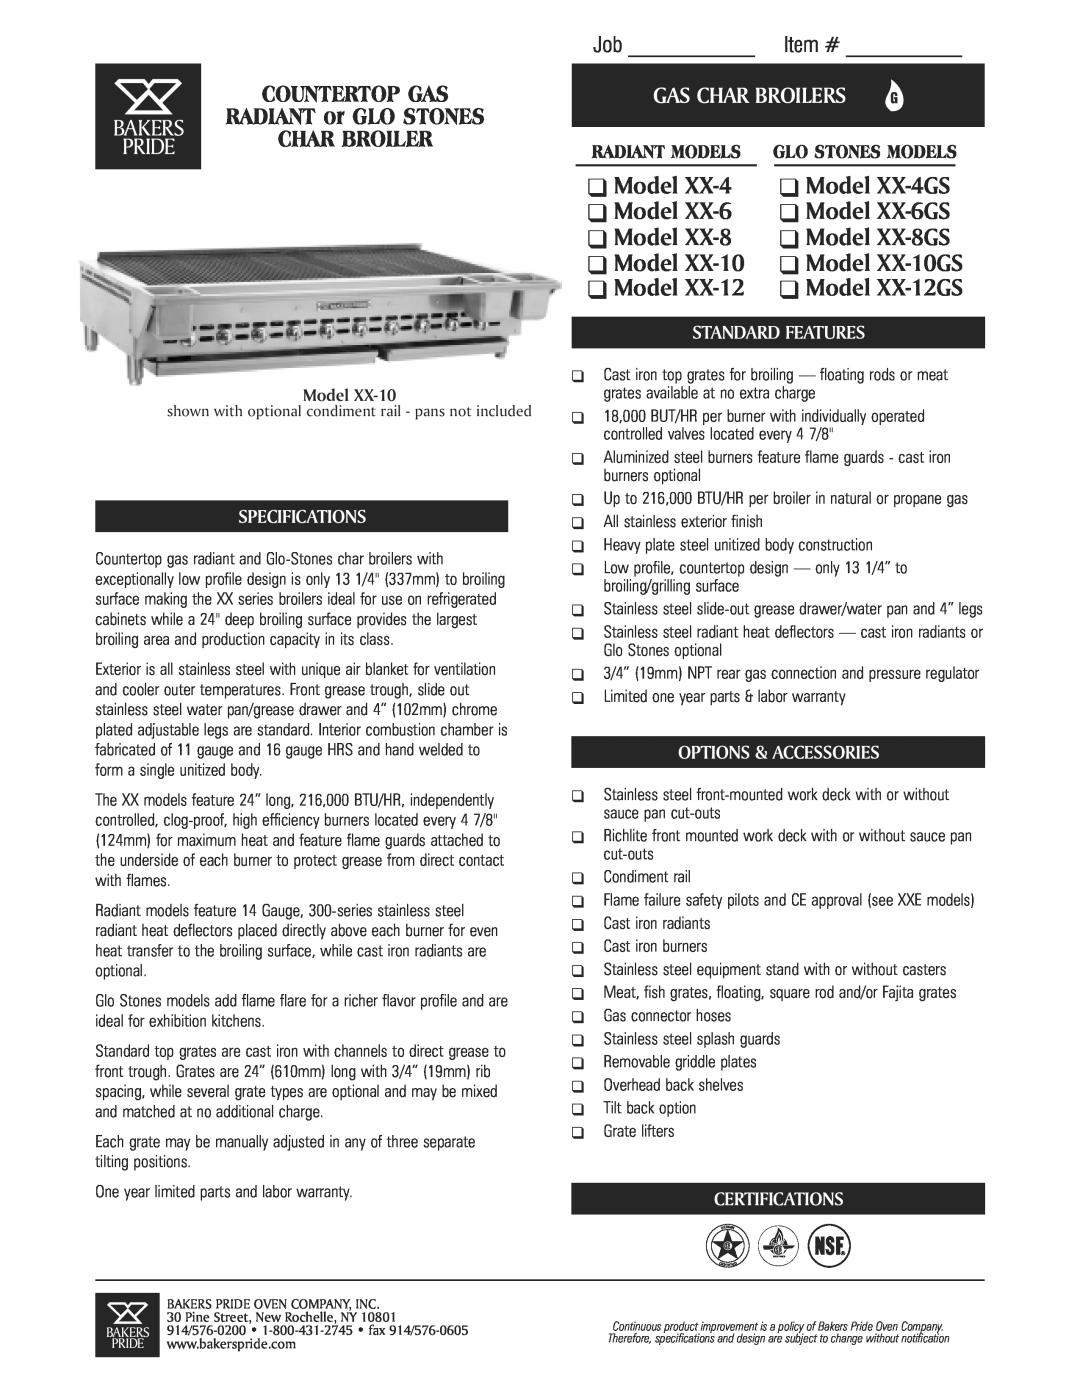 Bakers Pride Oven manual XX-4,6, Gas Char Broiler, Model Number, XX-6, XX-8, XX-10, XX-12, Serial Number, Type of Gas 